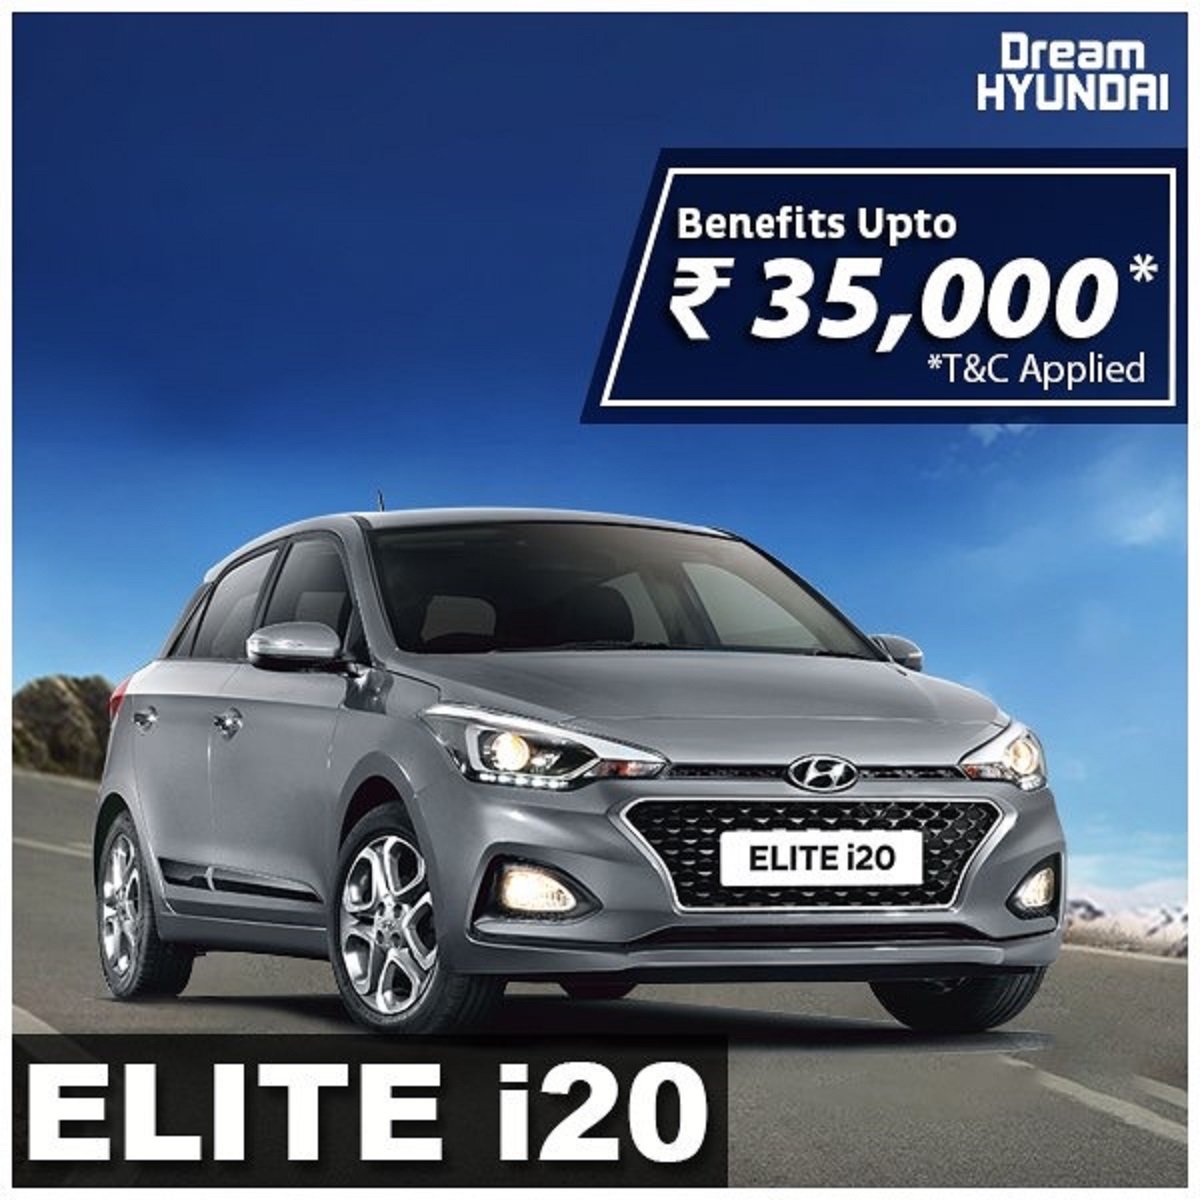 Hyundai Offering Elite i20 With Discounts Of Upto Rs. 35,000, Amidst Lockdown